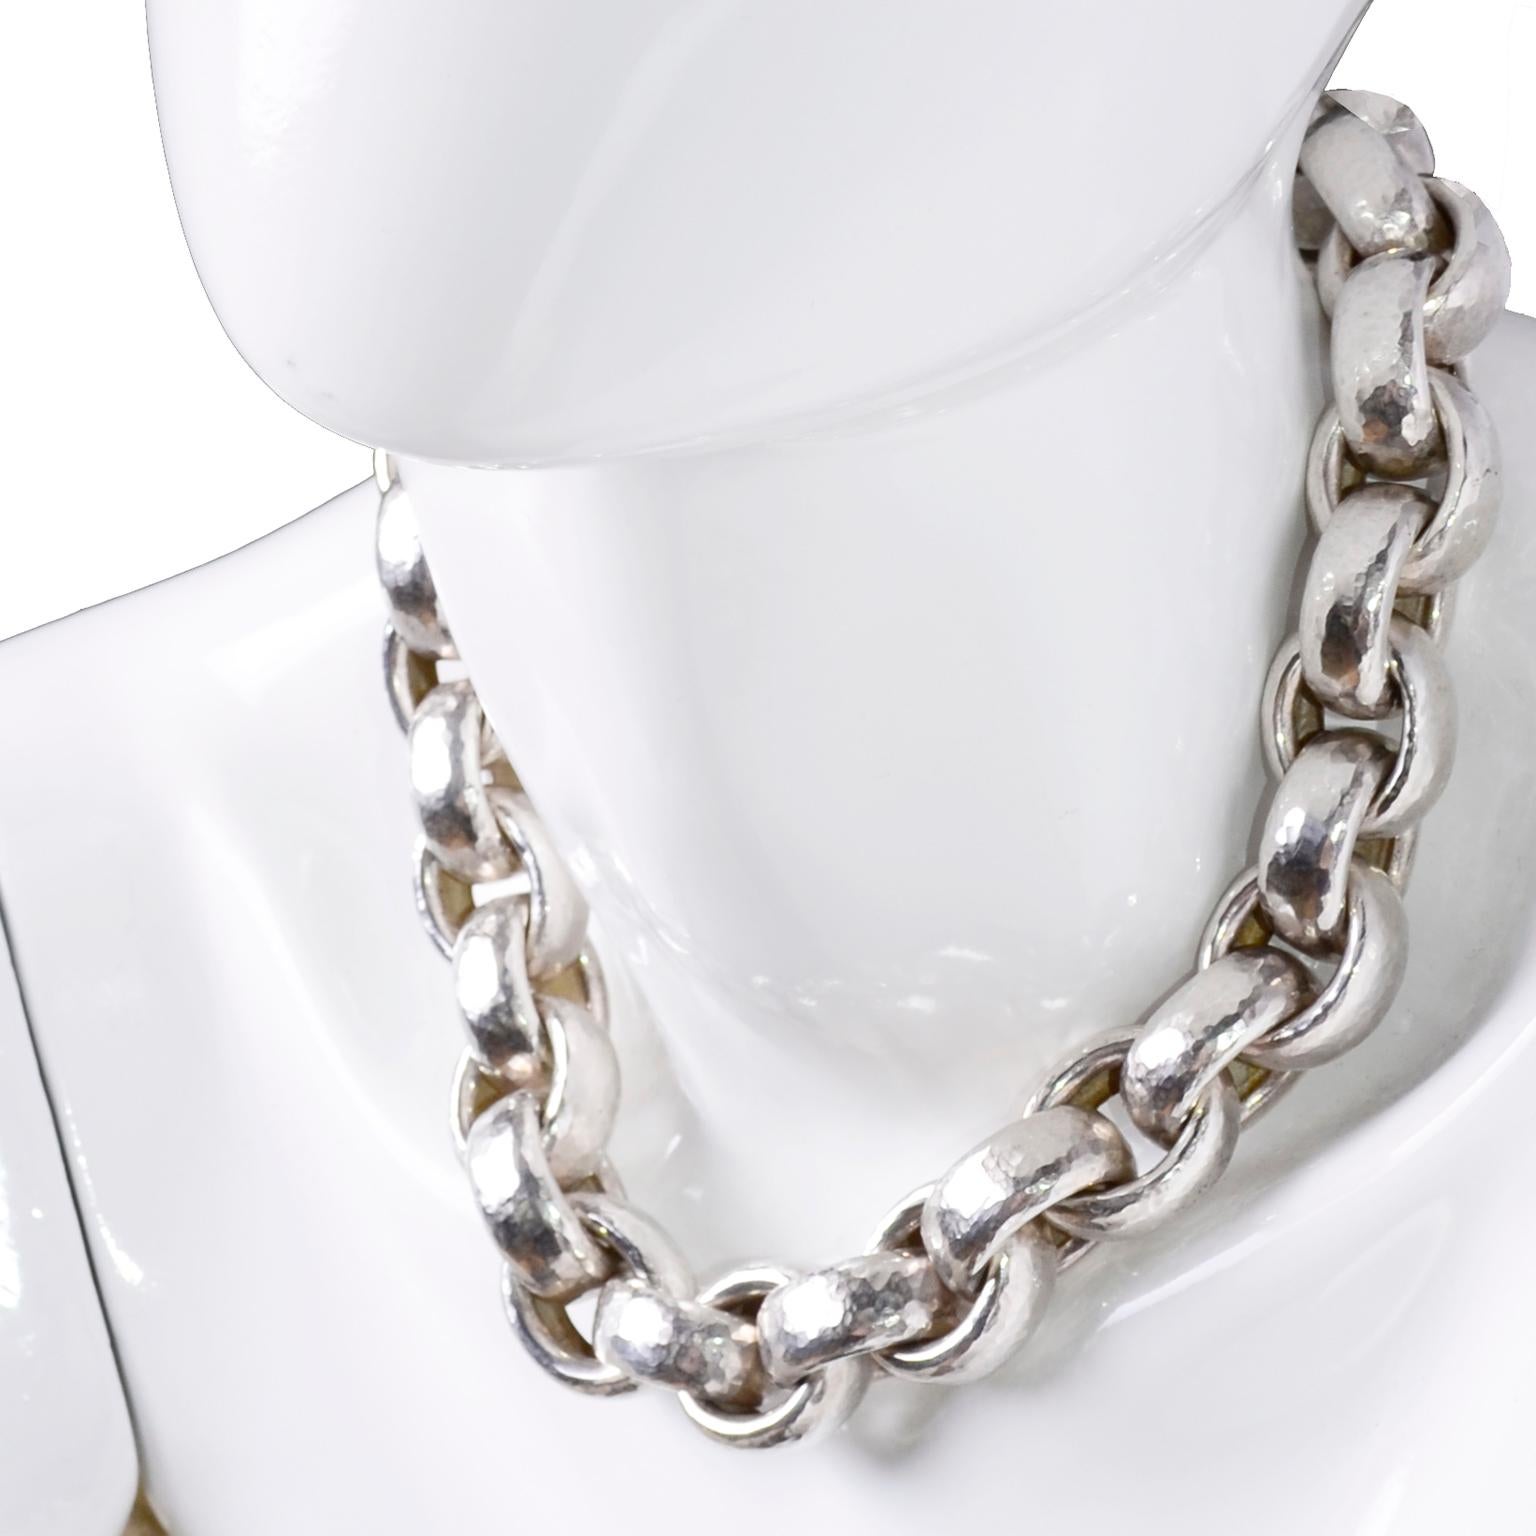 Stunningly beautiful chunky hammered sterling silver link necklace designed by Paloma Picasso in 1989 for Tiffany & Co.  The necklace is 20” long and the links are 3/8” wide and an inch and 1/8 “ long. Marked 995 T & Co Sterling Paloma Picasso 1989.